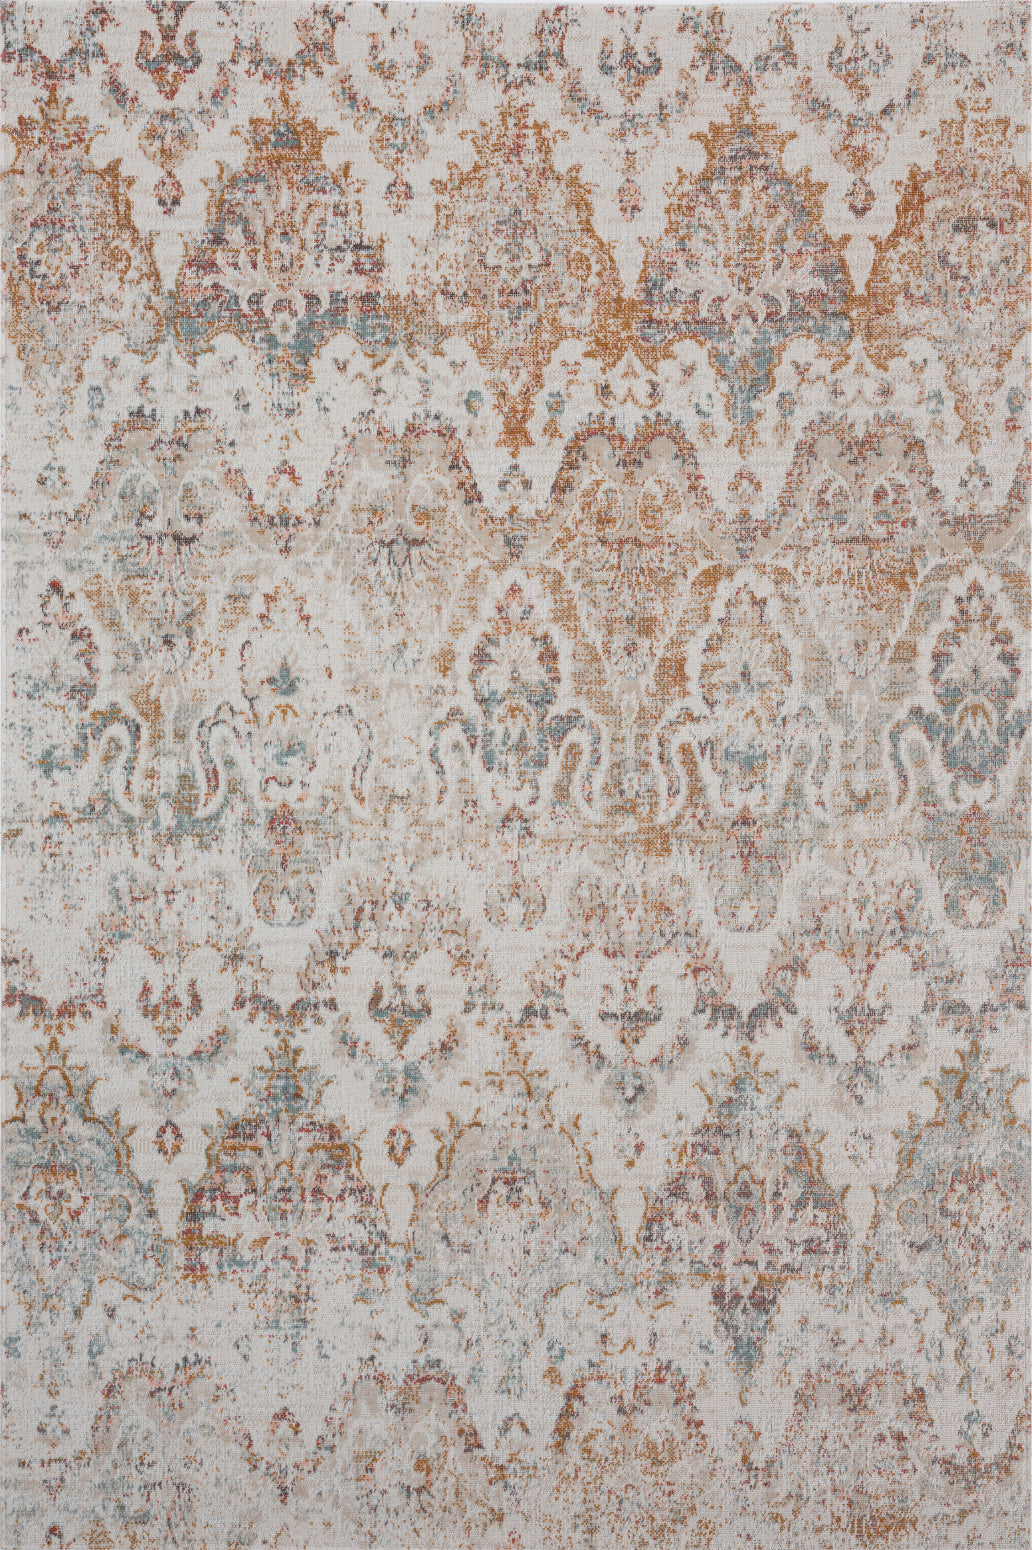 LR Resources Antiquity Southern Rustic Beige / Cream Area Rug main image